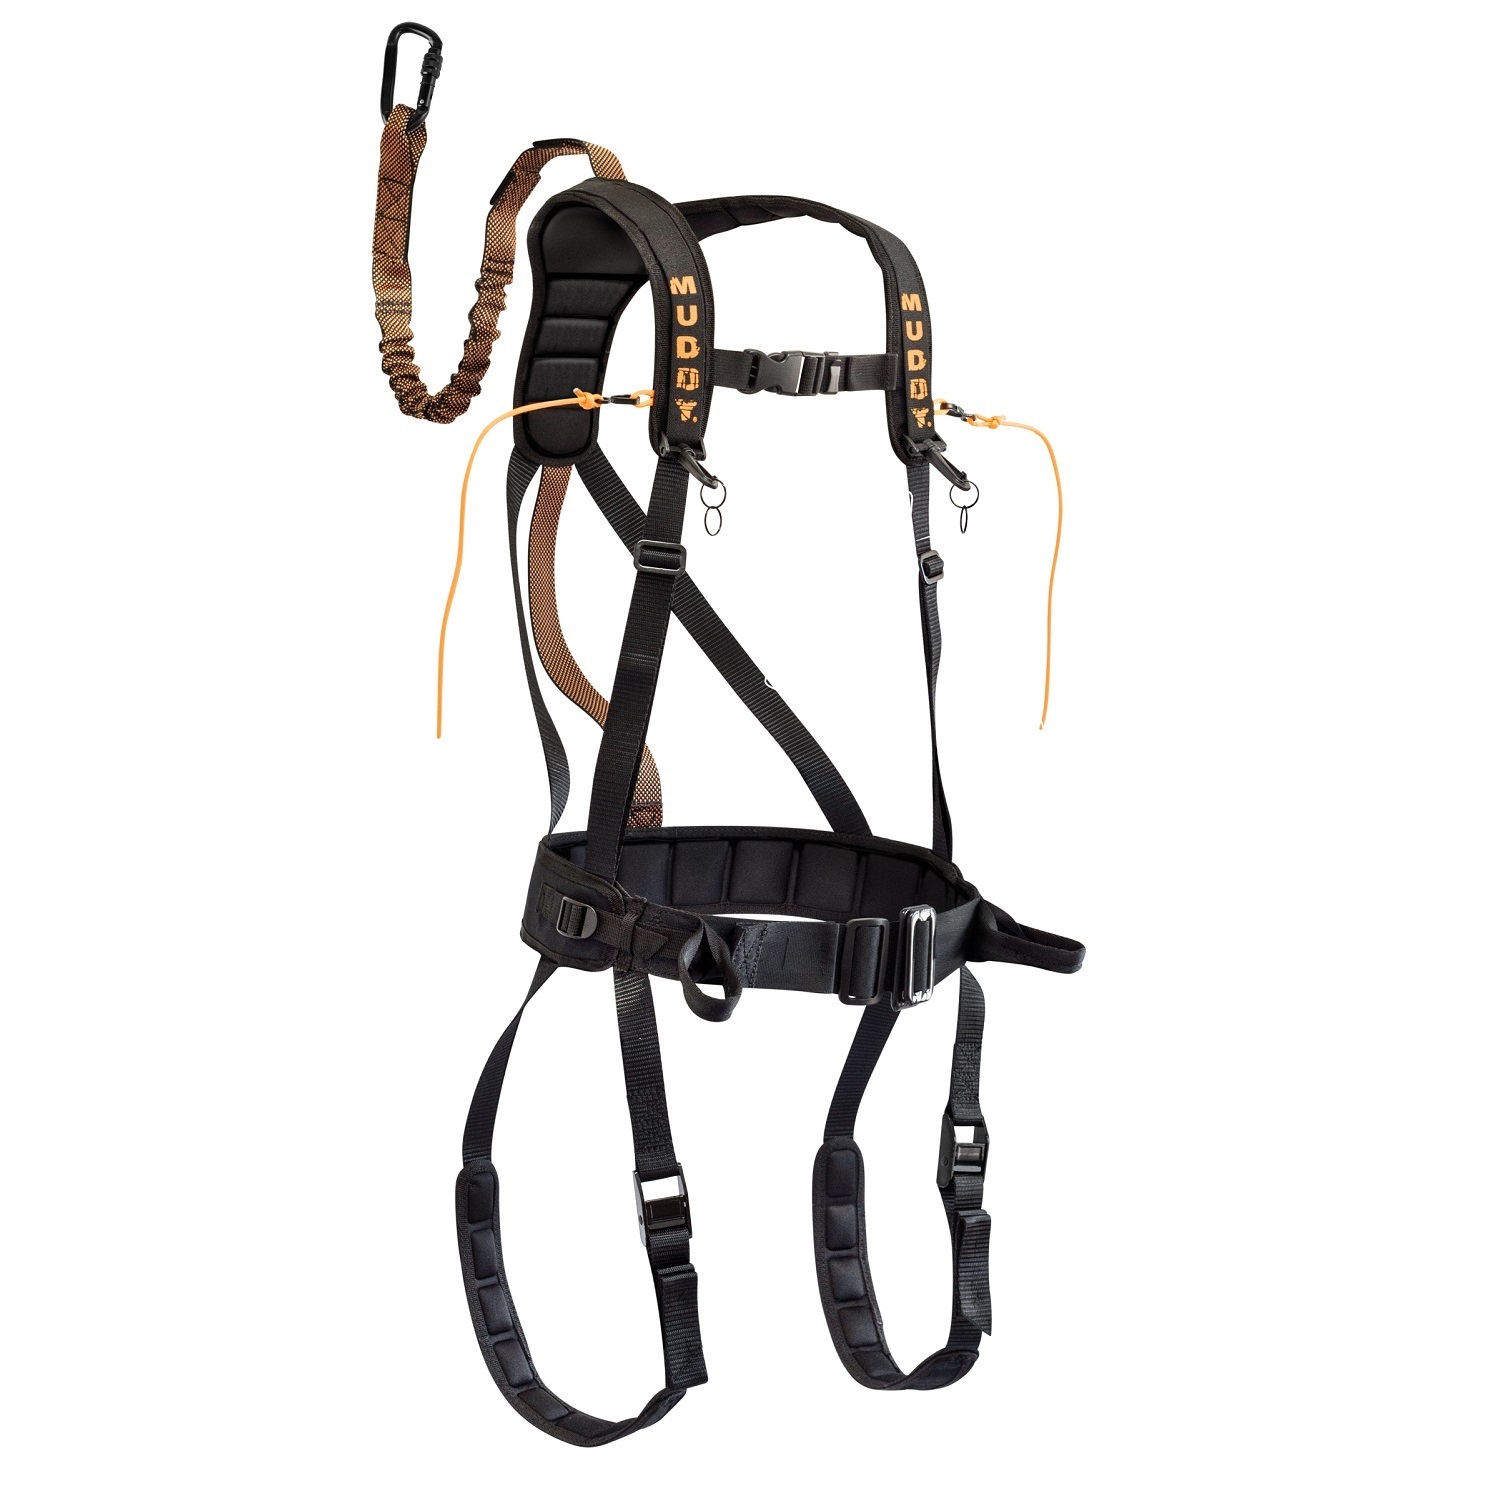 Muddy Safeguard Harness - Youth - Msh400-y